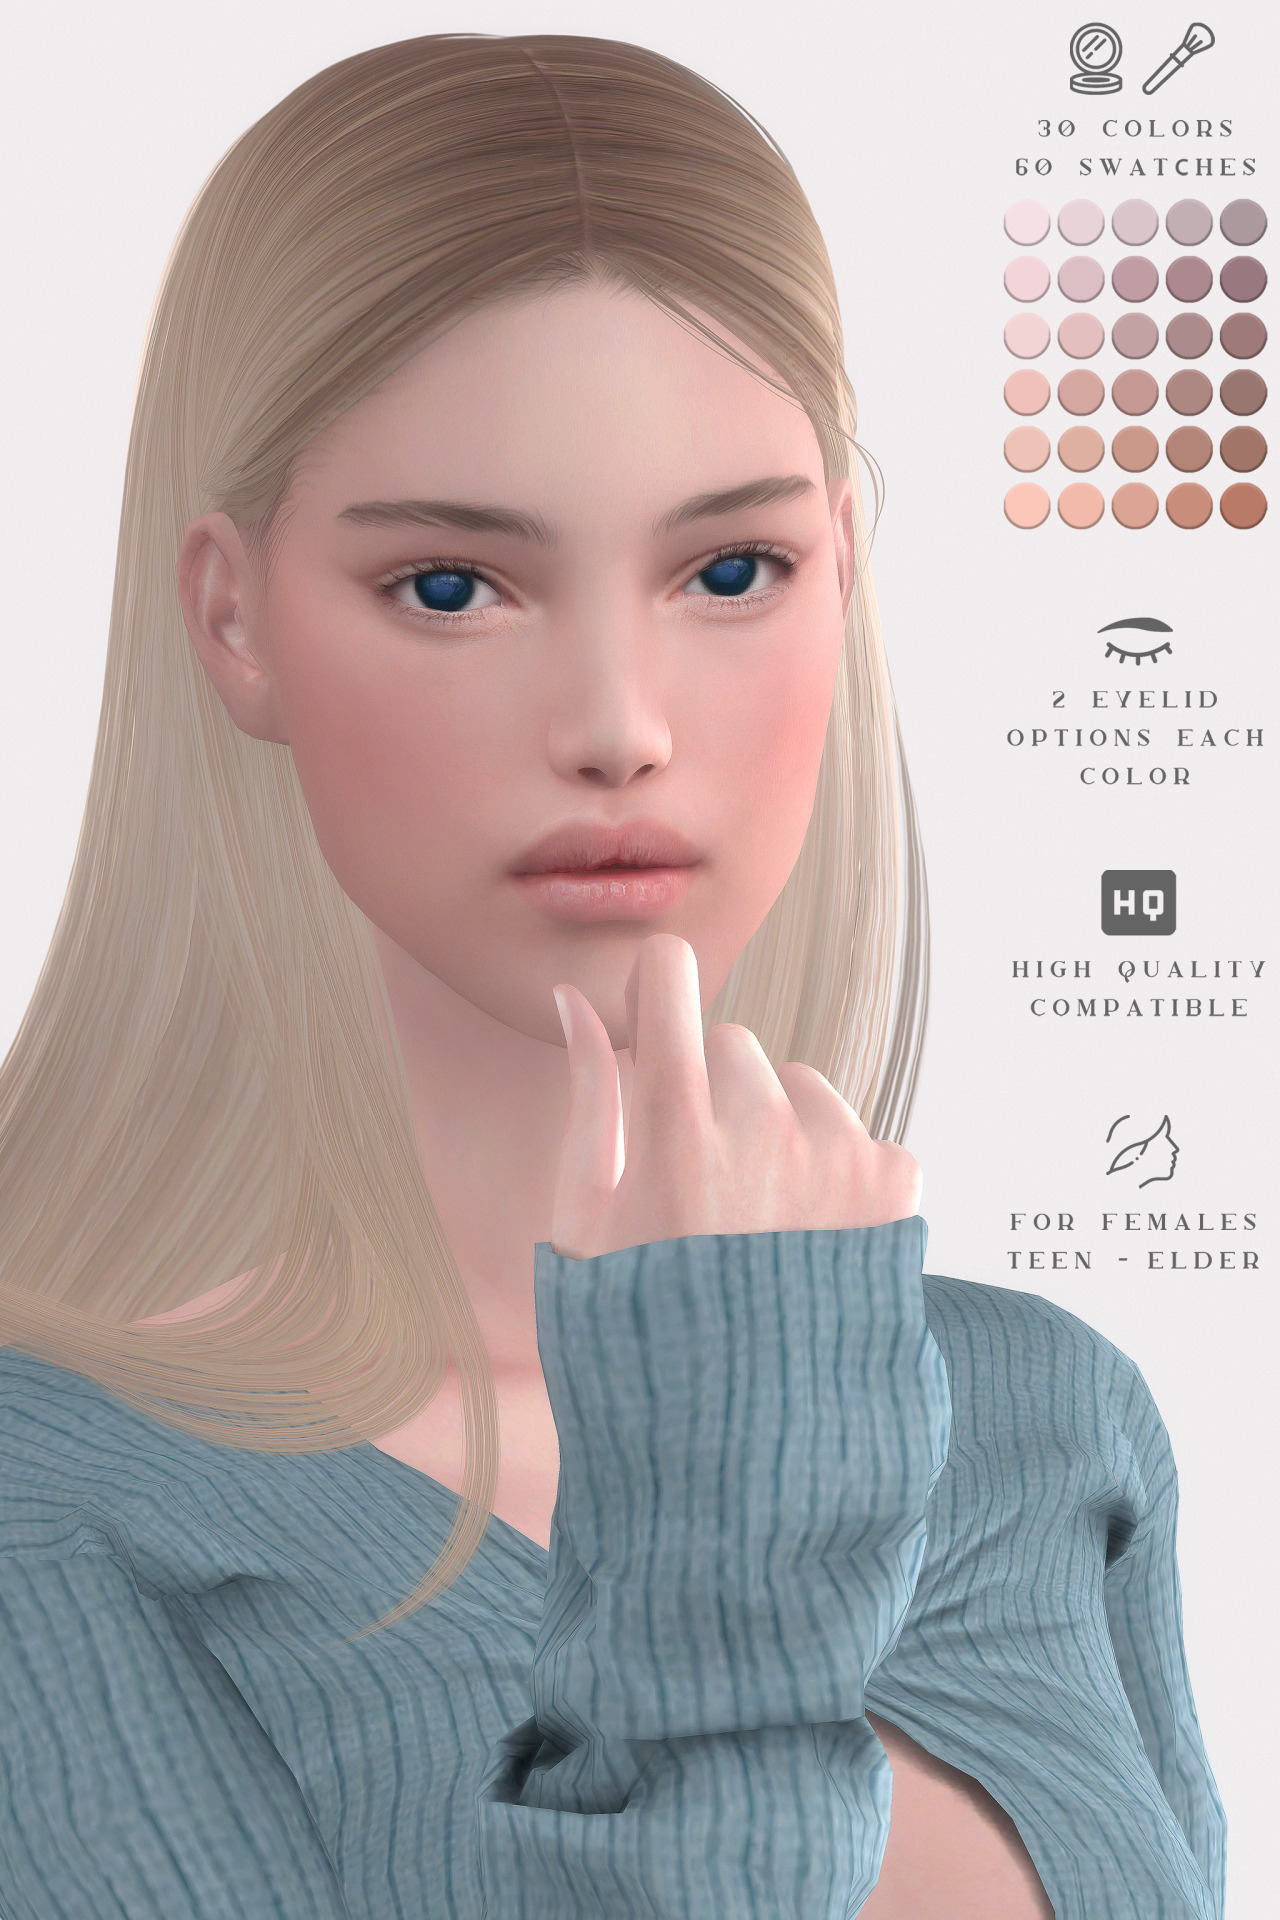 Sims 4 Skins Tumblr Pin On Kathryn Good Unfold Female Skin For Ts4 Terfearrence Patreon The Vrogue